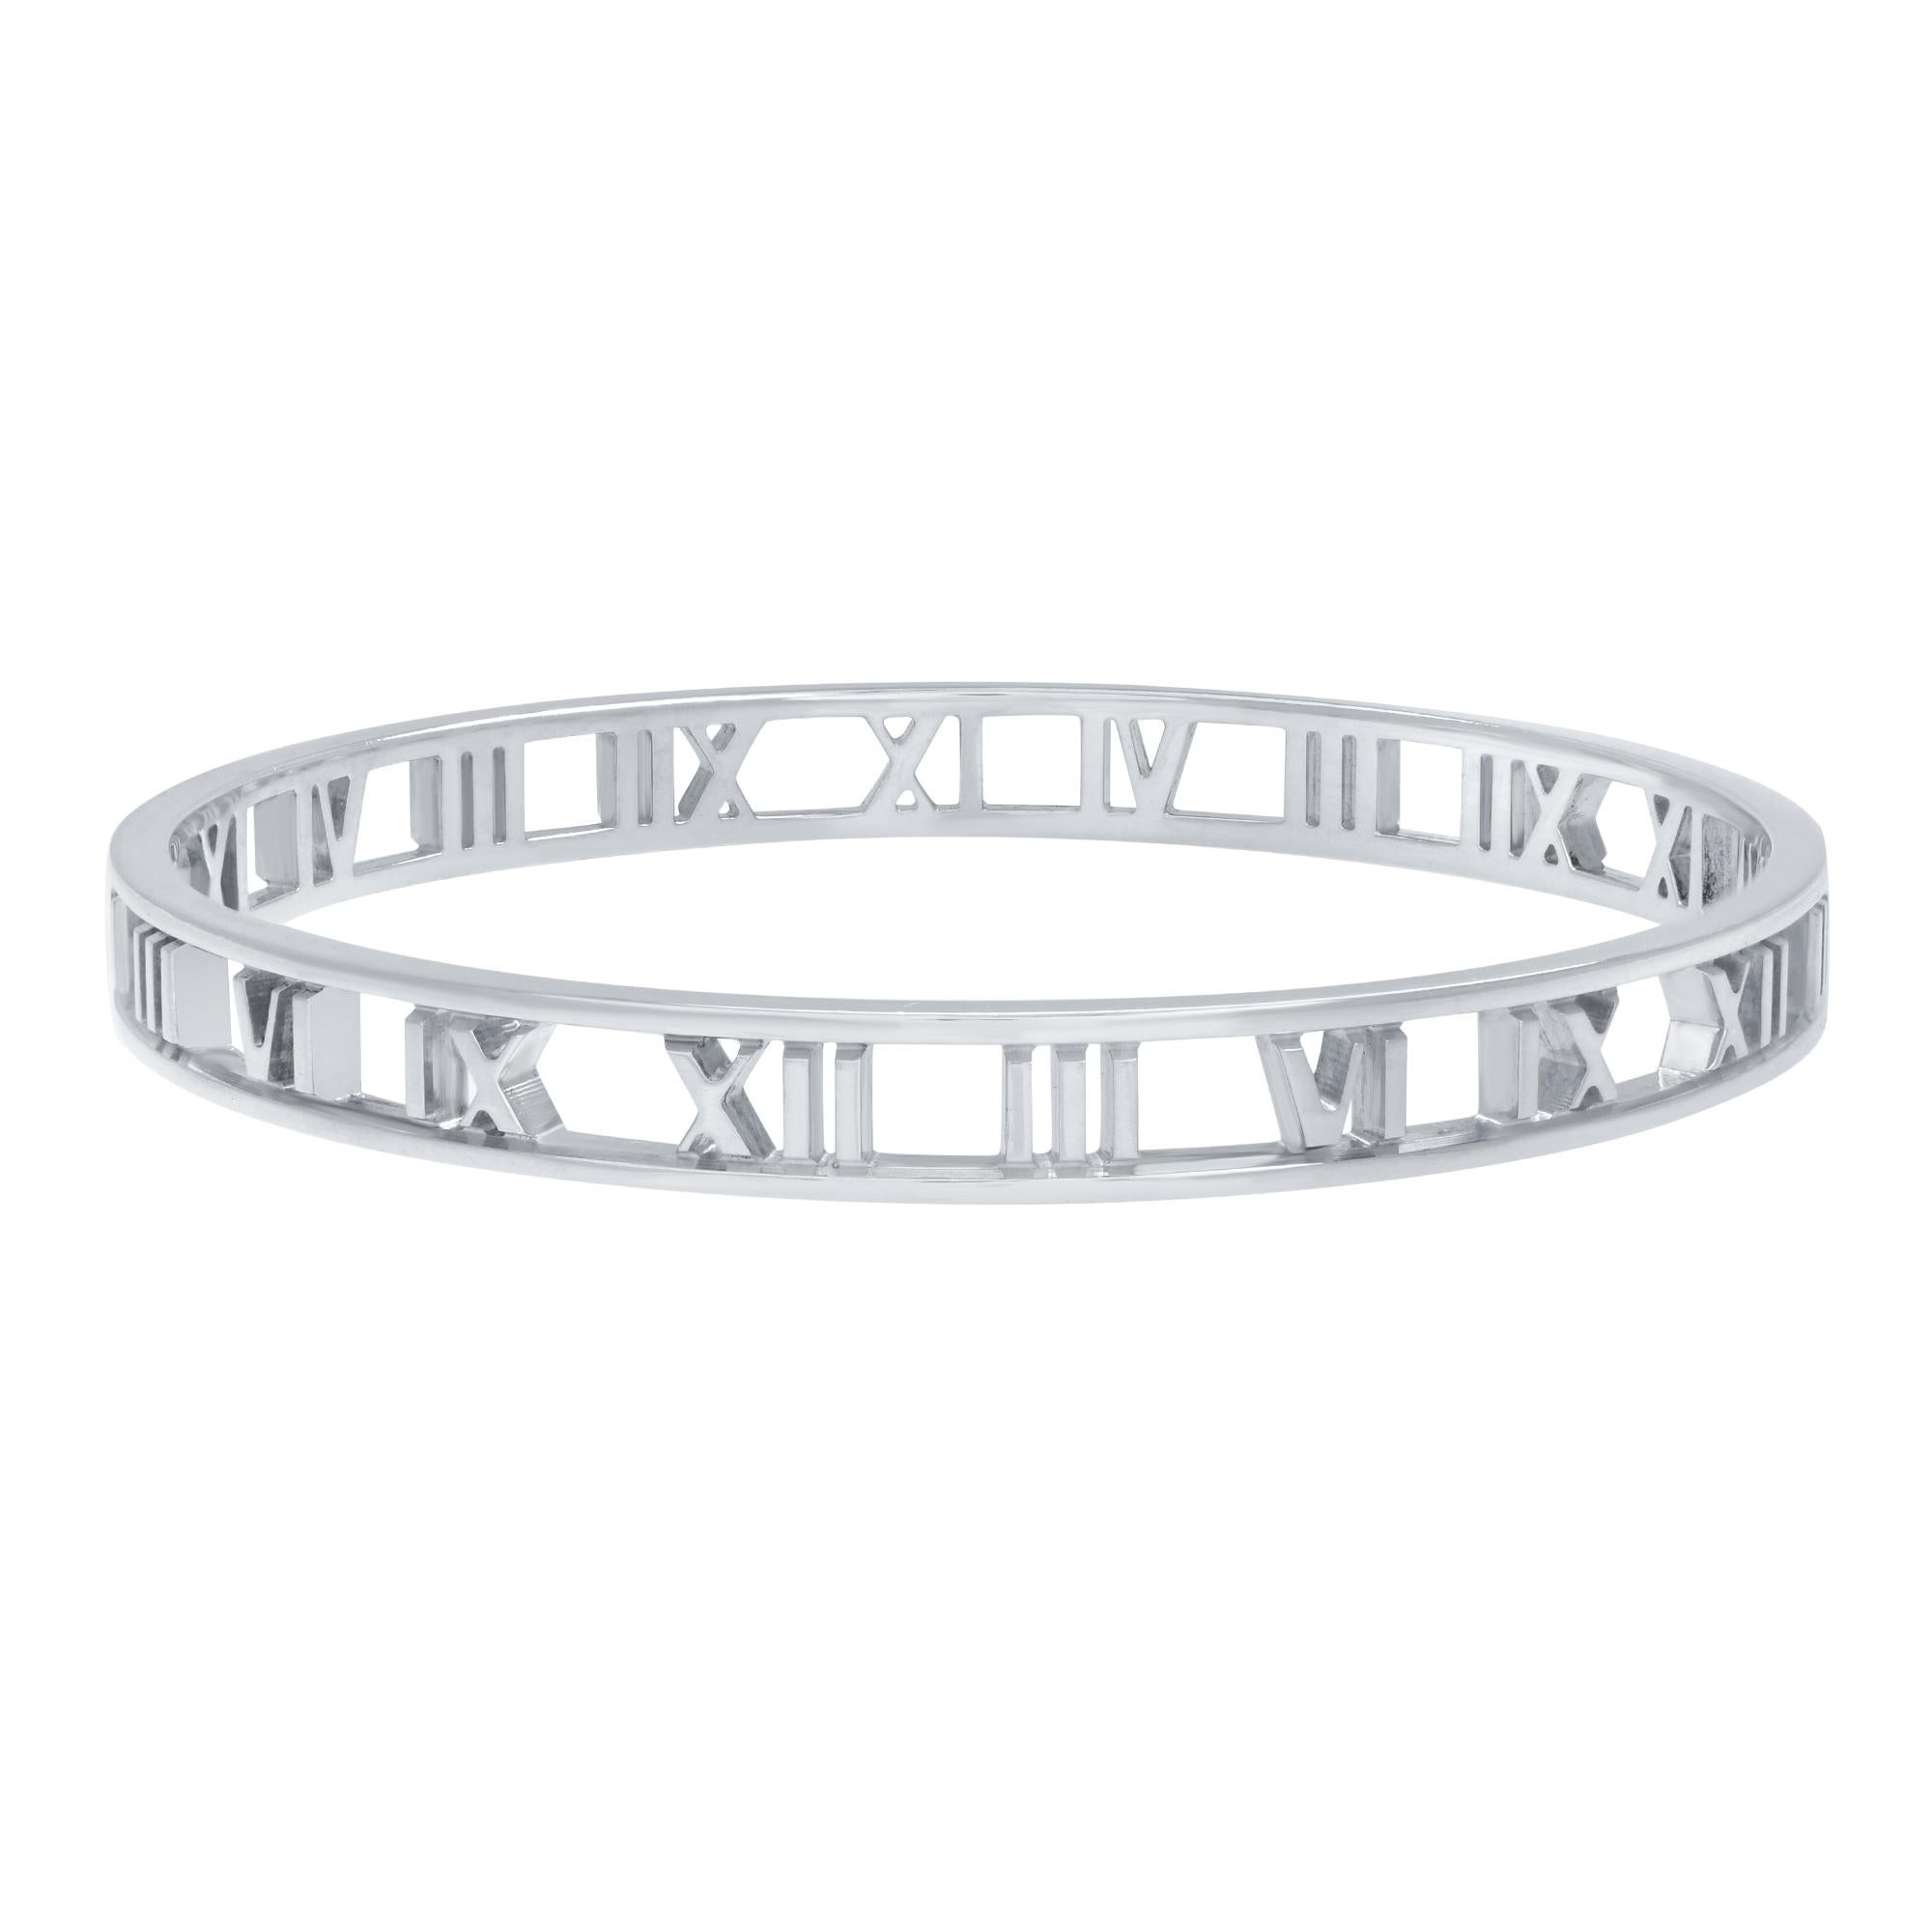 A Tiffany & Co. sterling silver bracelet from the Atlas collection. This bangle style bracelet features Roman numerals set in an openwork design. Fits wrist 5.75 inches. Excellent pre-owned condition. The bracelet is accompanied by a Tiffany & Co.